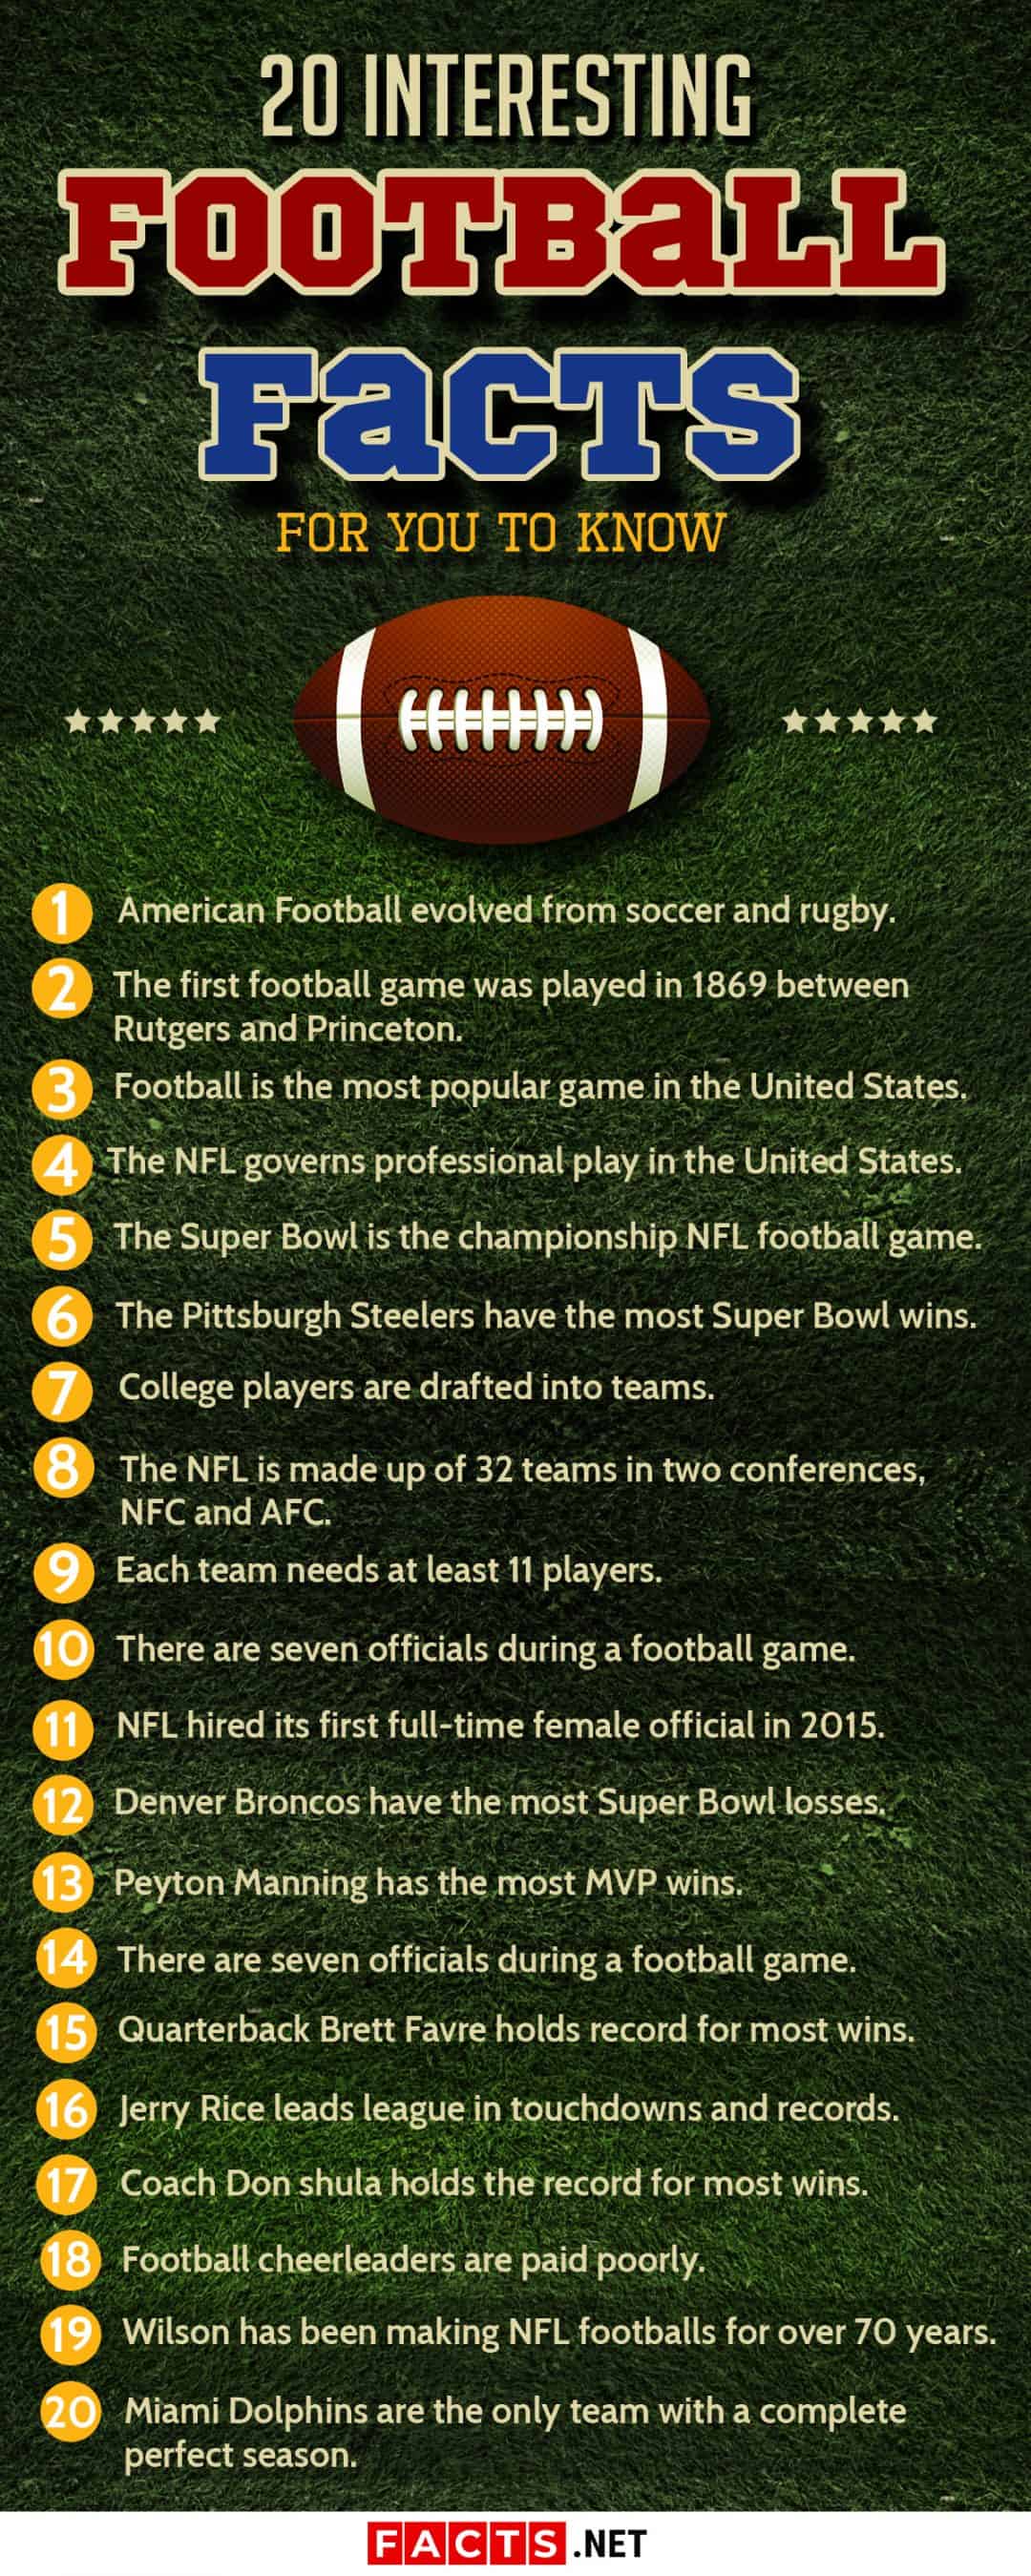 Top 20 Facts about Football - History, Popularity, Rules & More | Facts.net